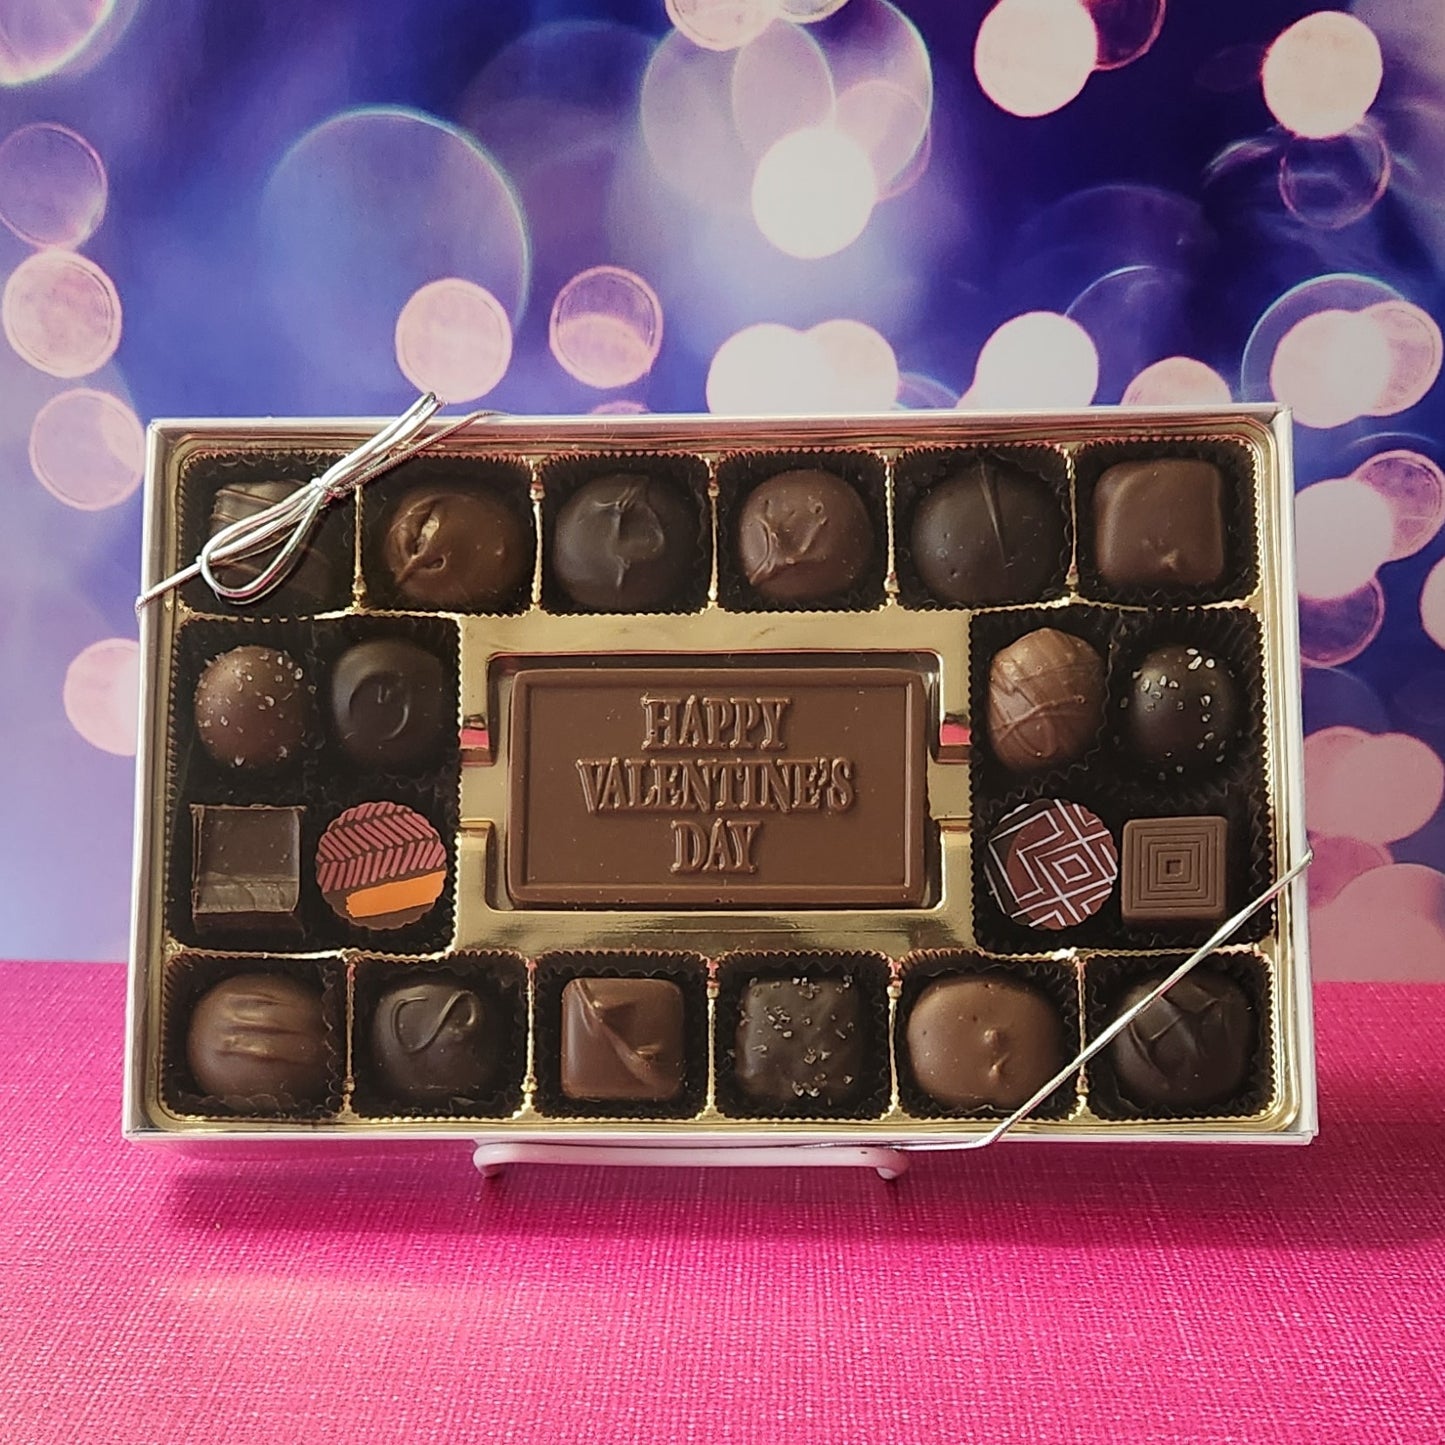 This 20 piece milk and dark chocolate candy assortment has all your favorites. From Soft Centers to Truffles there is something for everyone. Right in the center is a Milk Chocolate card that wishes you a Happy Valentine's Day. 